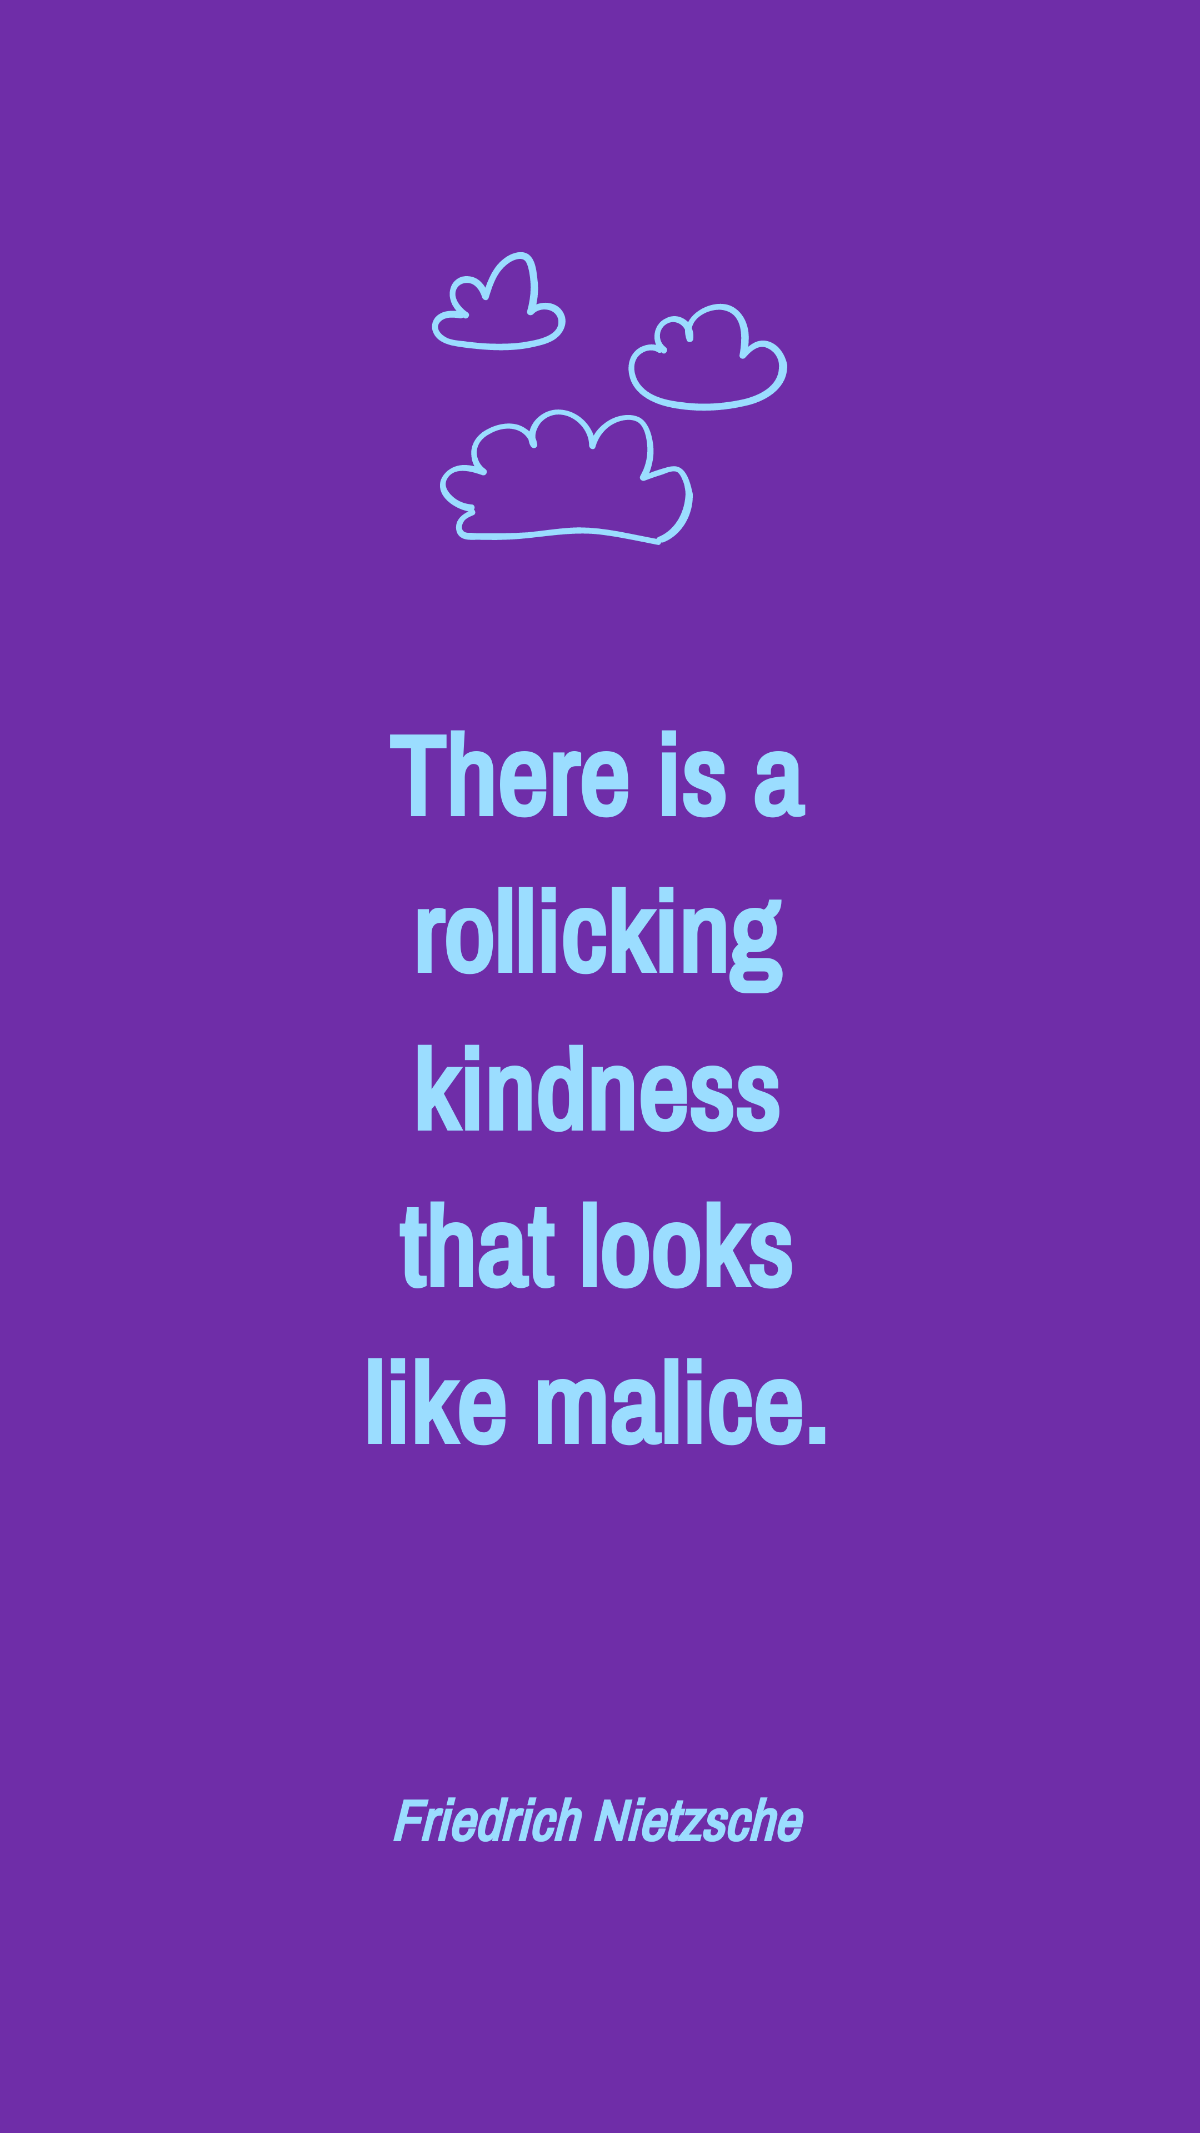 Friedrich Nietzsche - There is a rollicking kindness that looks like malice.